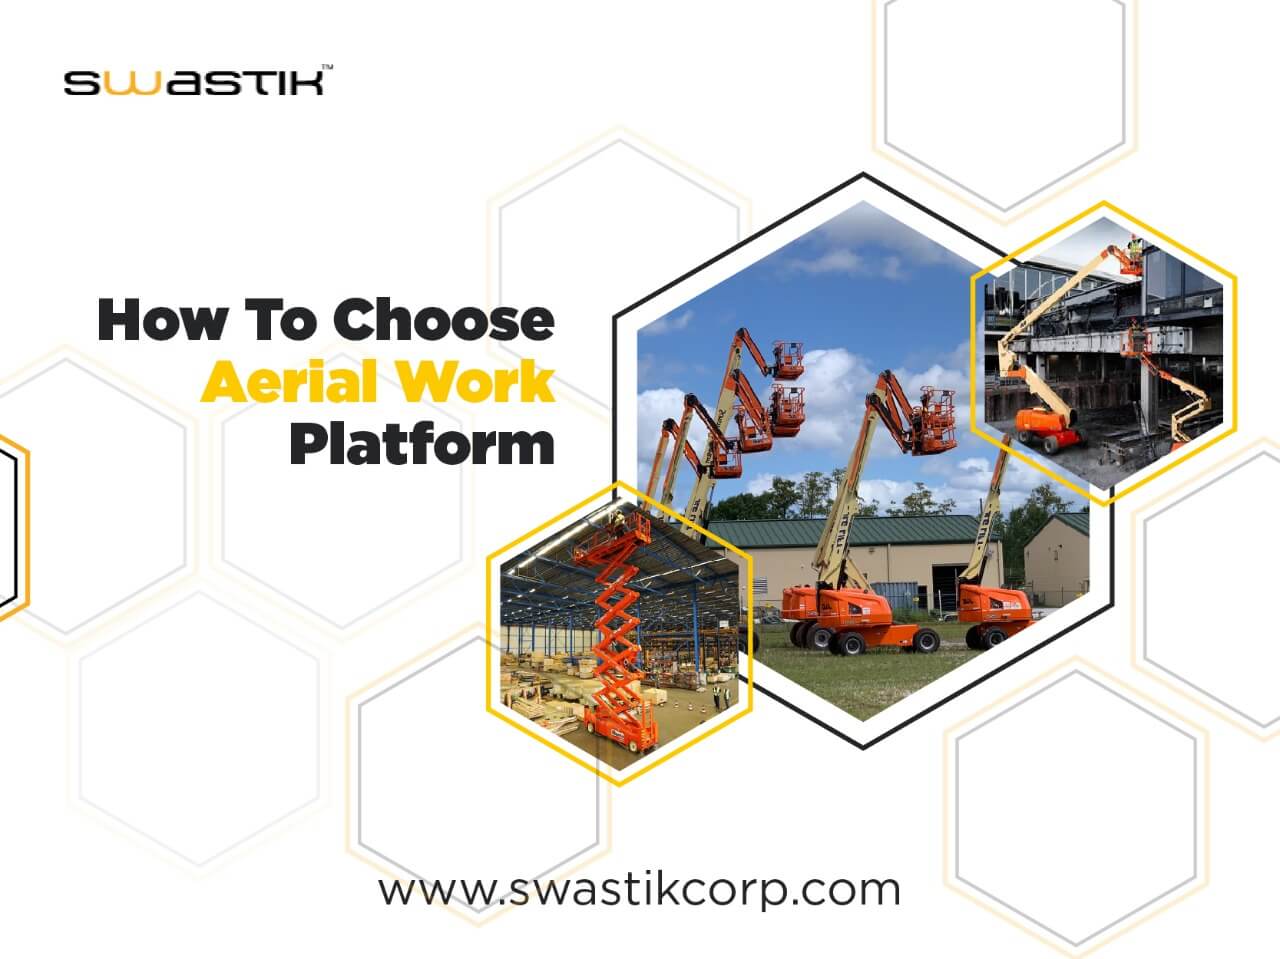 How to choose a right aerial work platform
